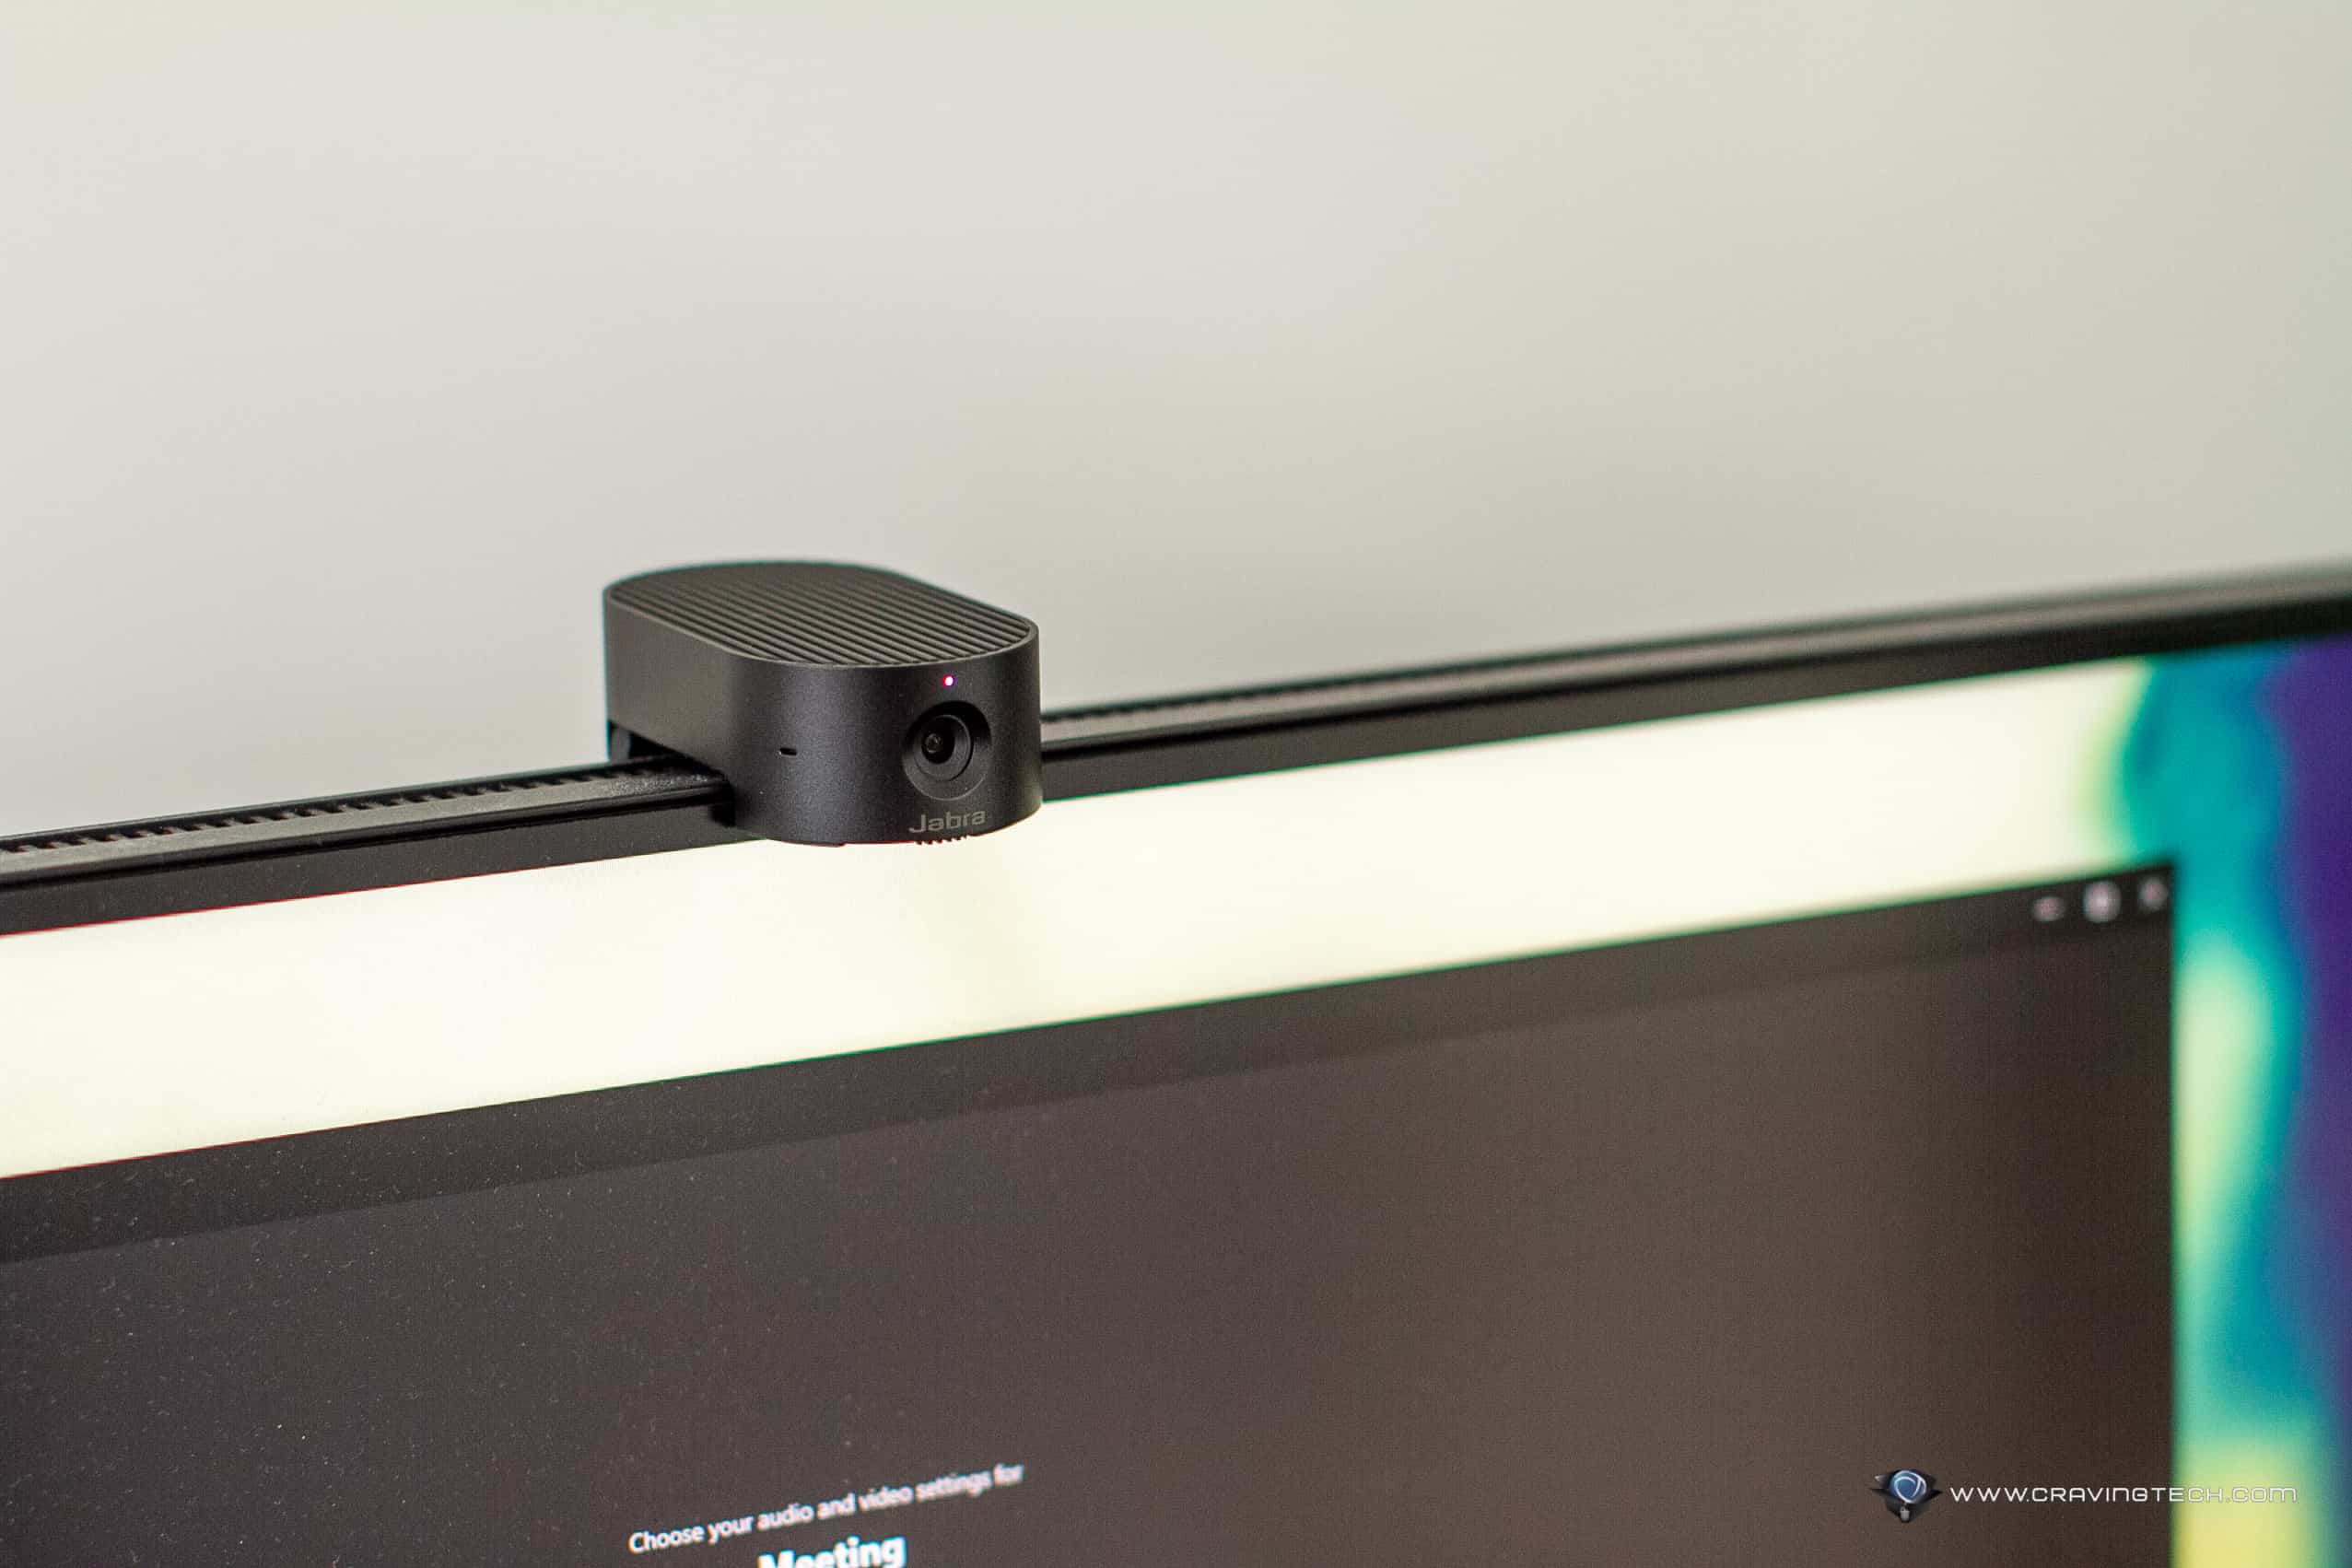 Your smart, personal video conferencing camera – Jabra PanaCast 20 Review